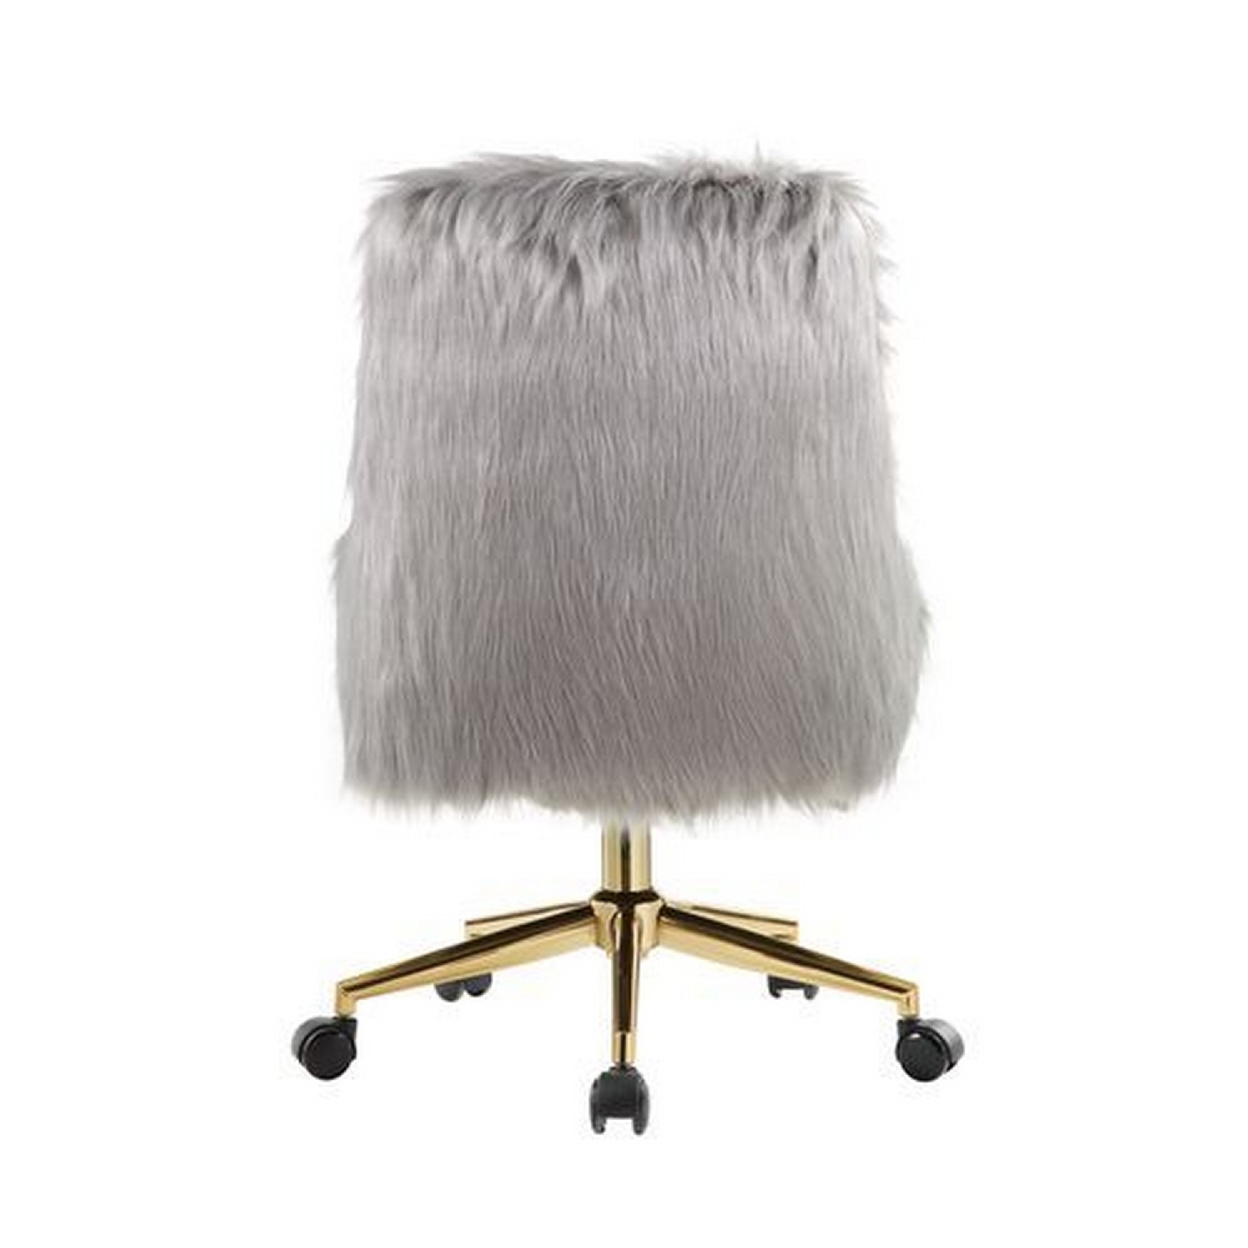 Swivel Office Chair With Faux Fur Fabric, Gray And Gold- Saltoro Sherpi